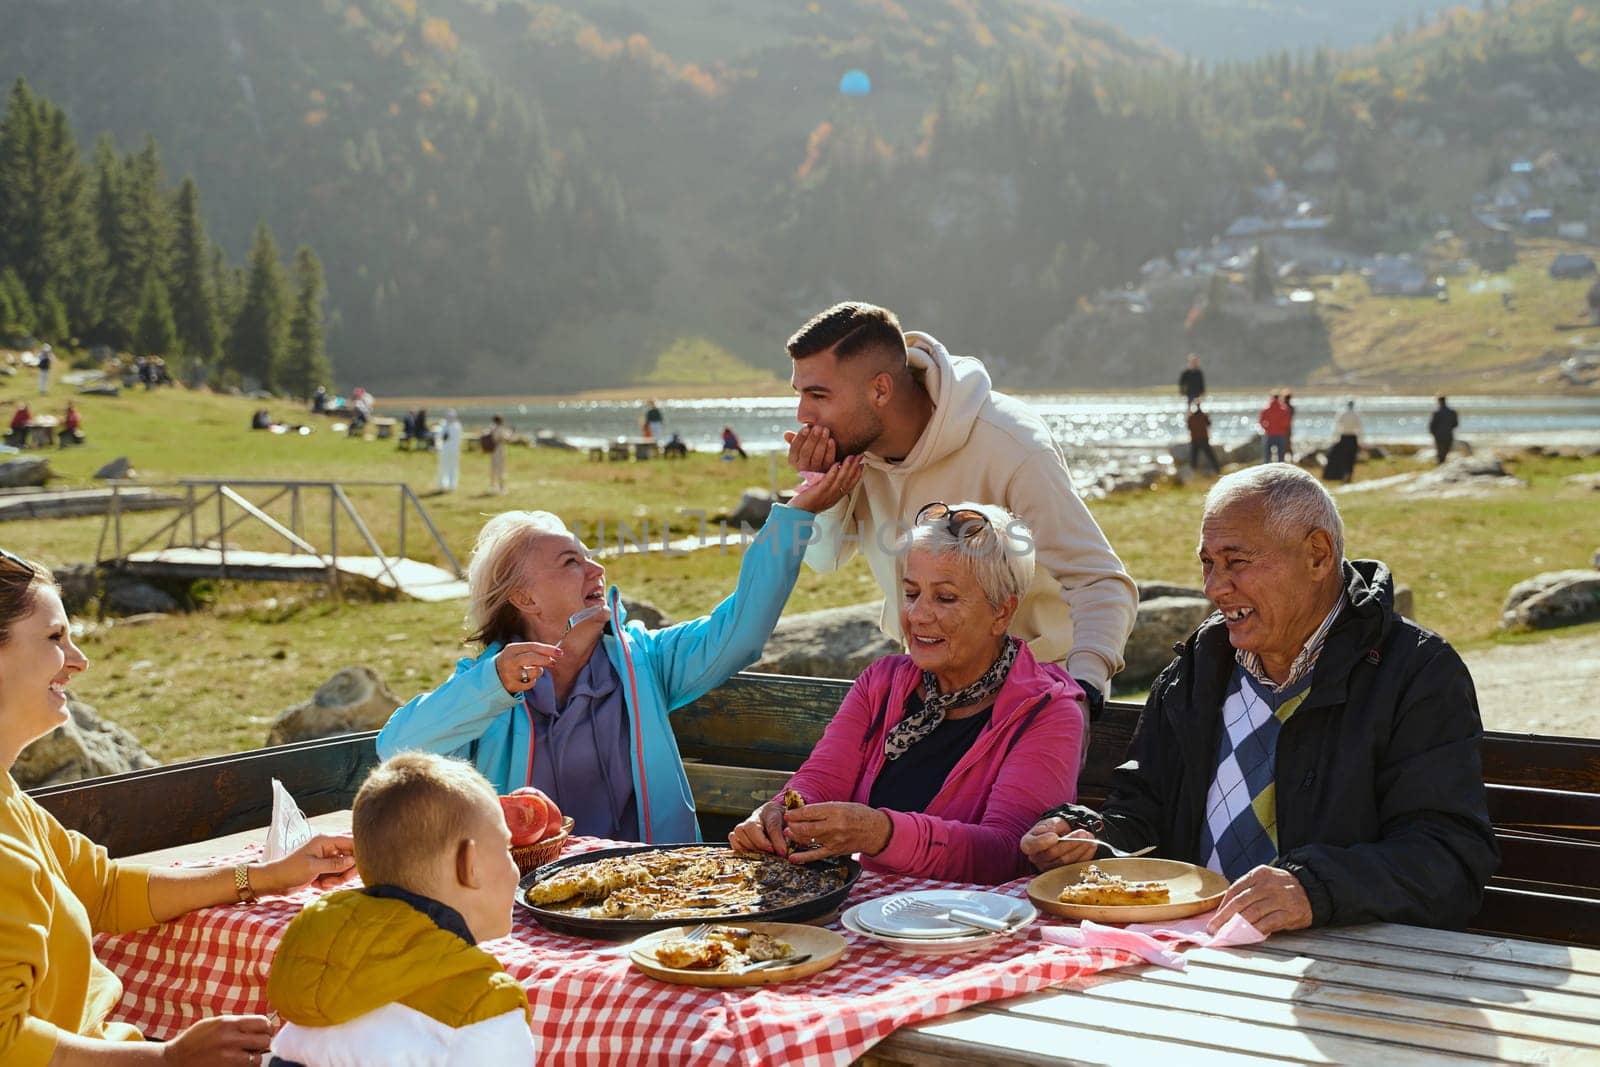 A family on a mountain vacation indulges in the pleasures of a healthy life, savoring traditional pie while surrounded by the breathtaking beauty of nature, fostering family bonds and embracing the vitality of their mountain retreat by dotshock